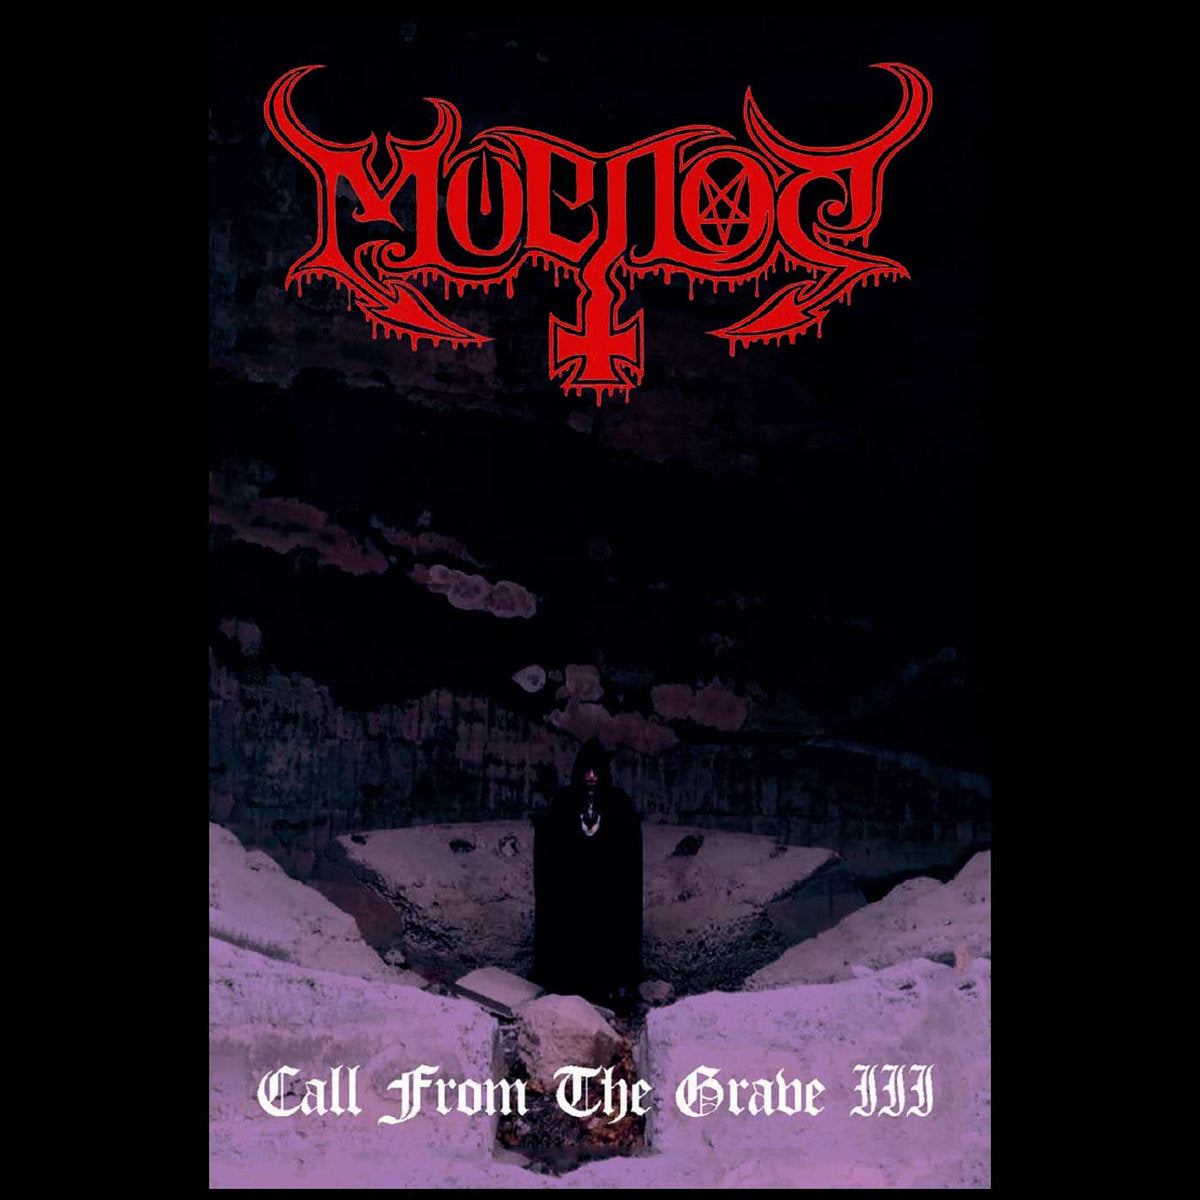 Moenos - Call From The Grave III